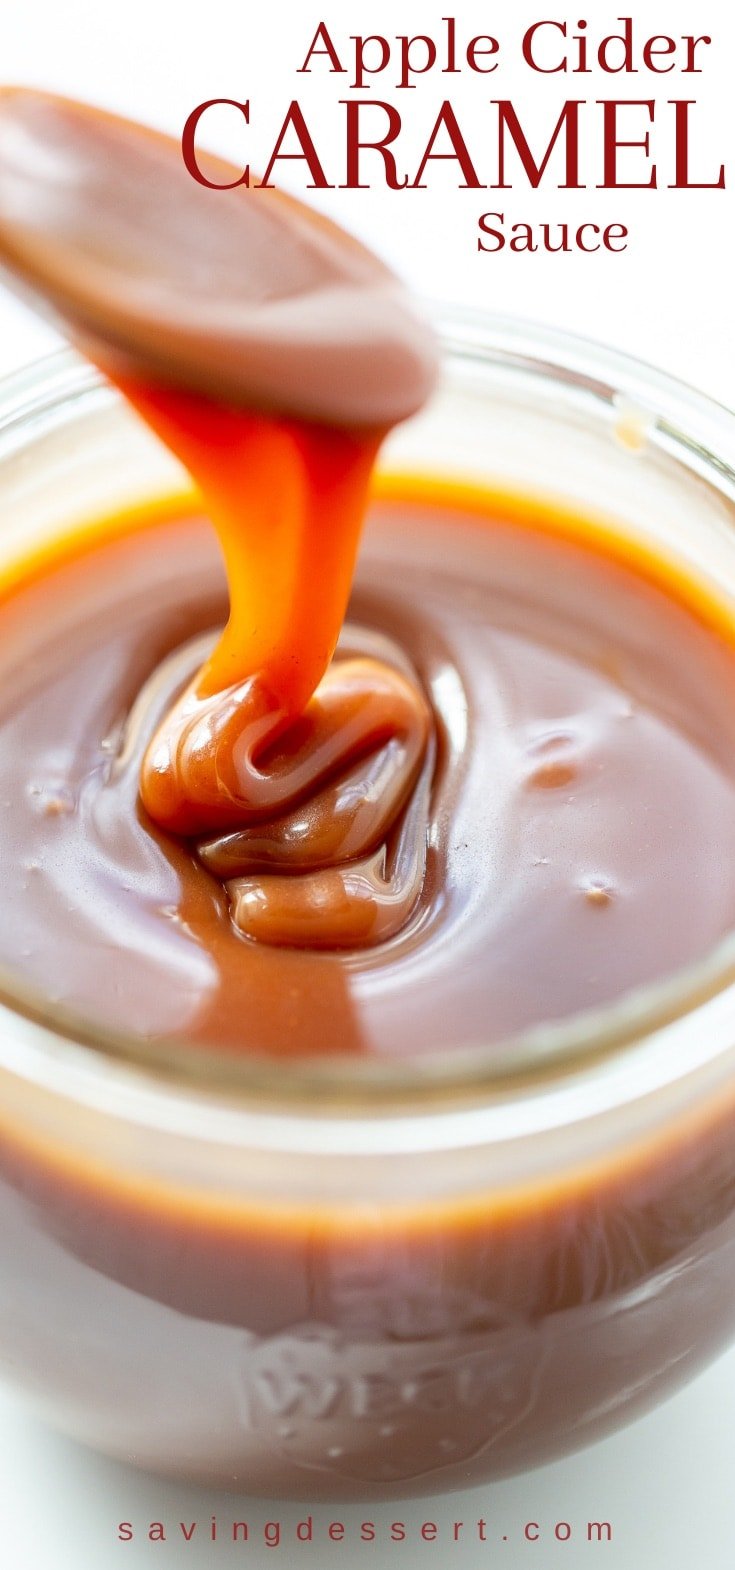 A spoonful of apple cider caramel sauce being drizzled into a jar